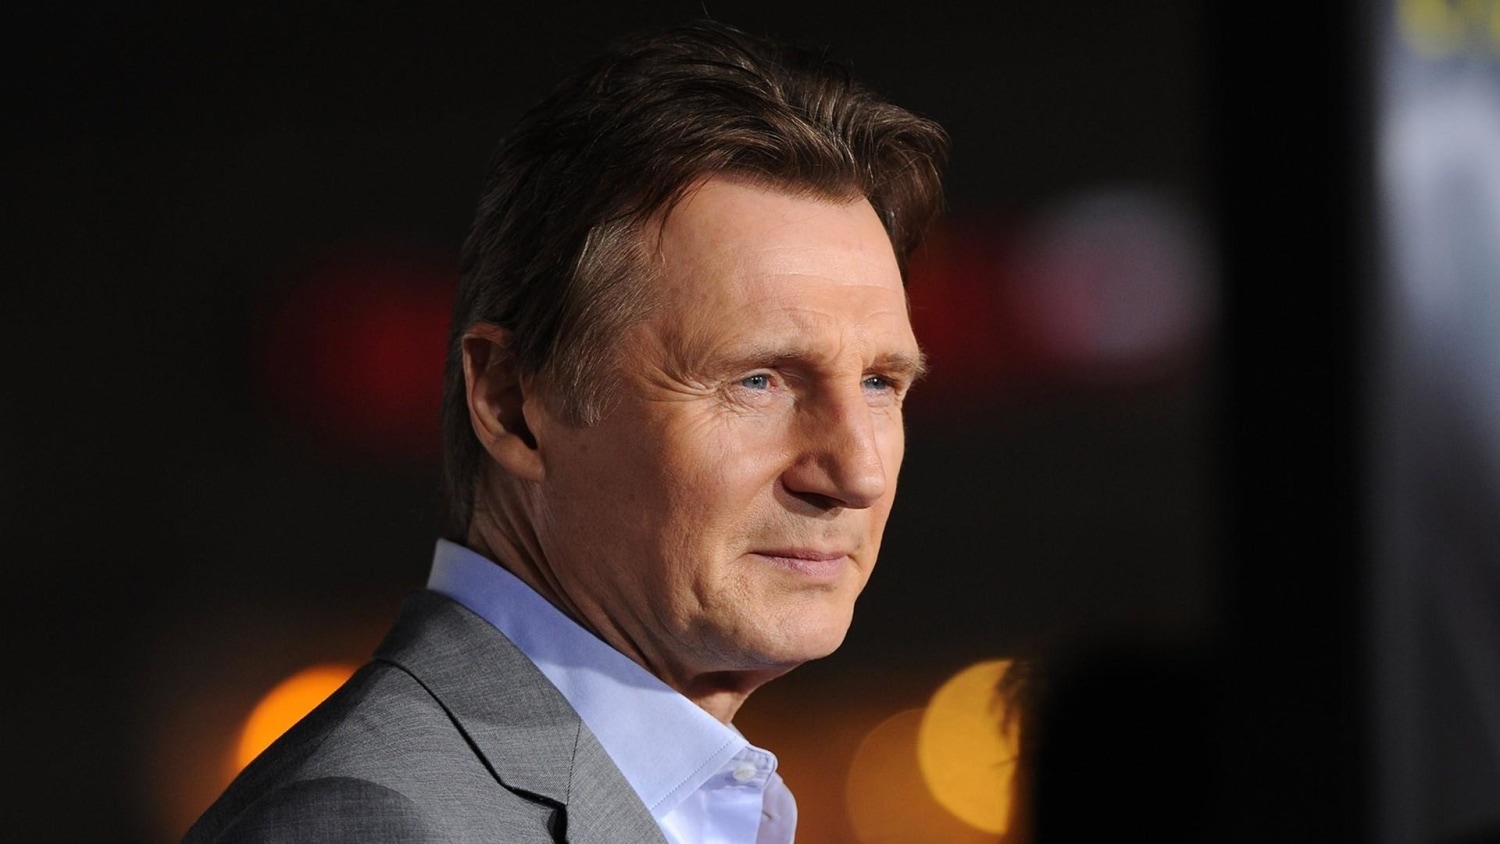 Liam Neeson film red carpet canceled amid controversy